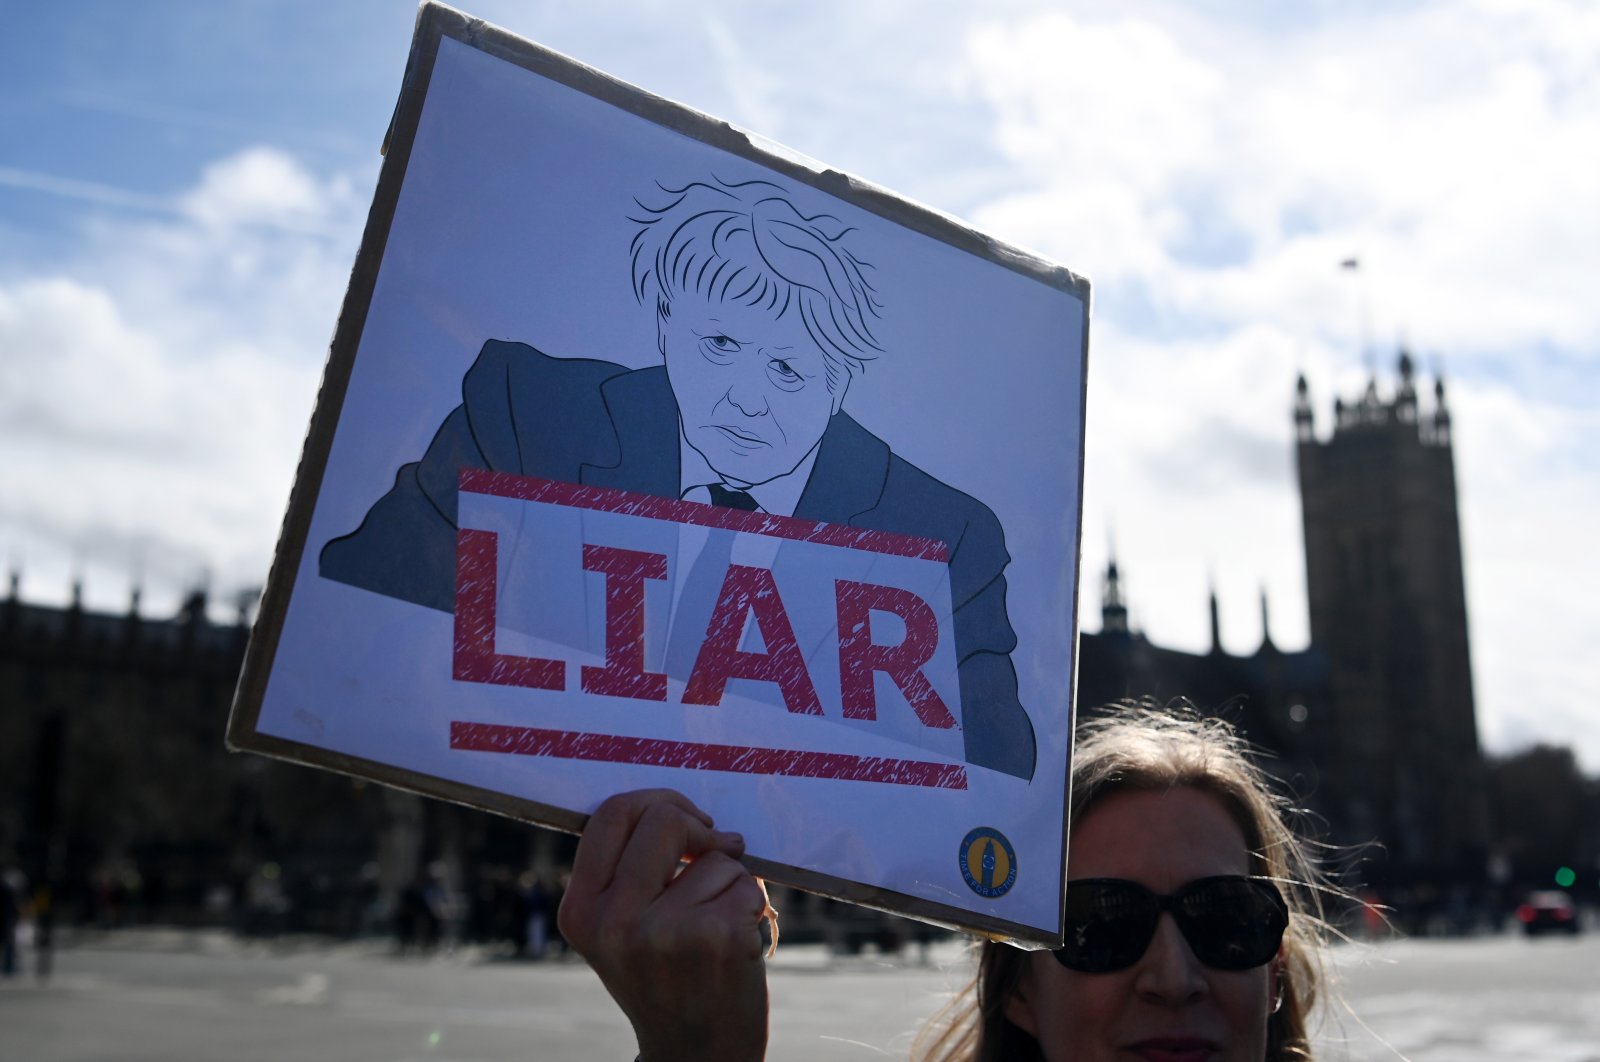 A protester demonstrates against former British PM Boris Johnson outside parliament in London, U.K., March 22, 2023. (EPA Photo)